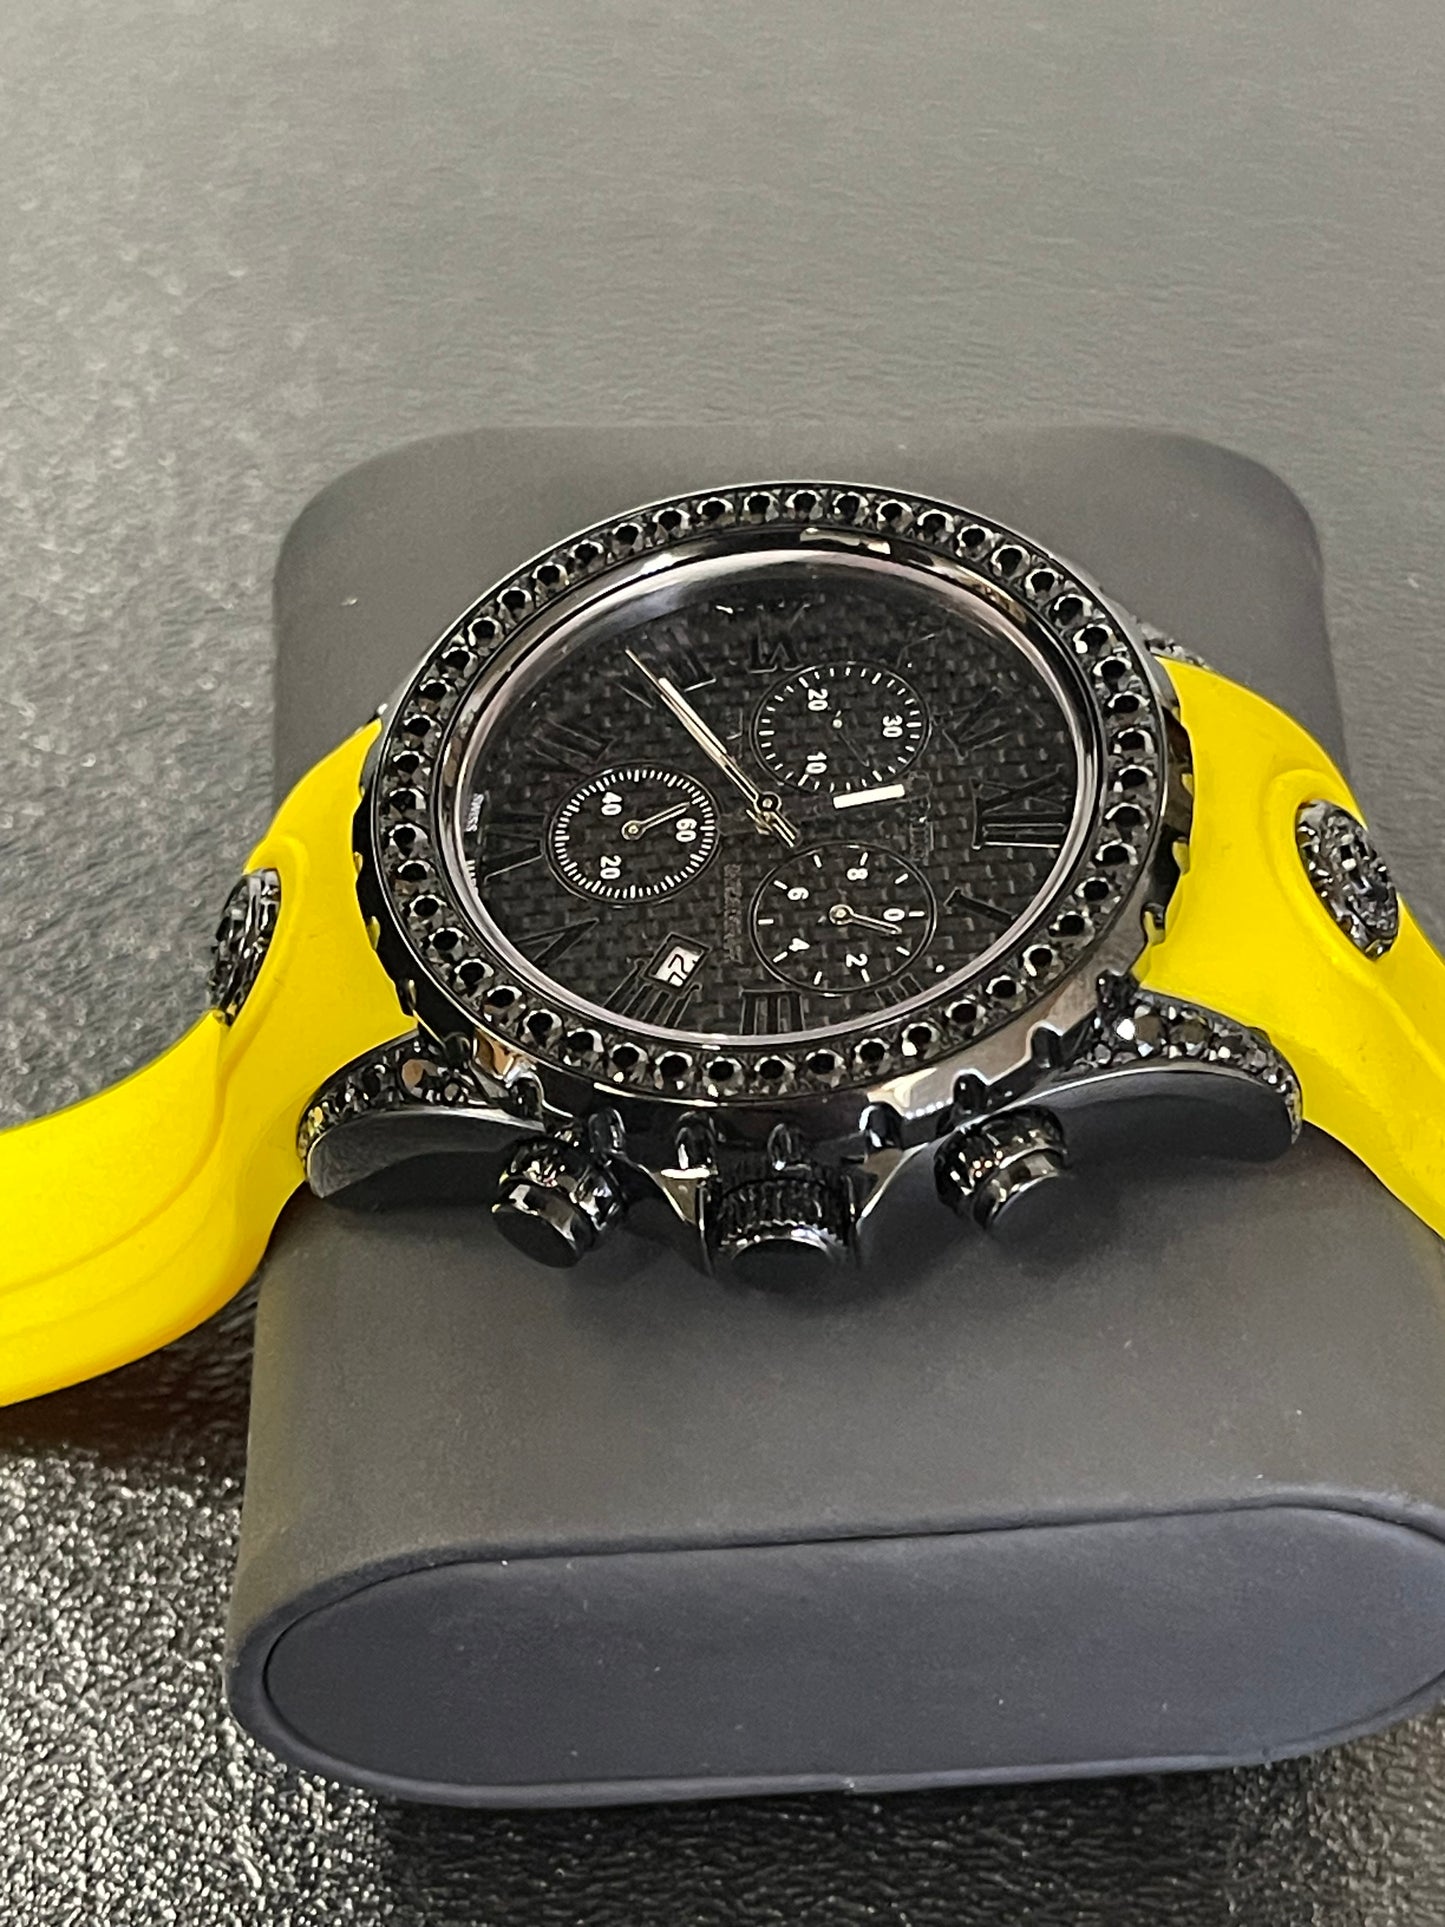 ALL BLACK/YELLOW T3 CARBON FIBER LIMITED EDITION